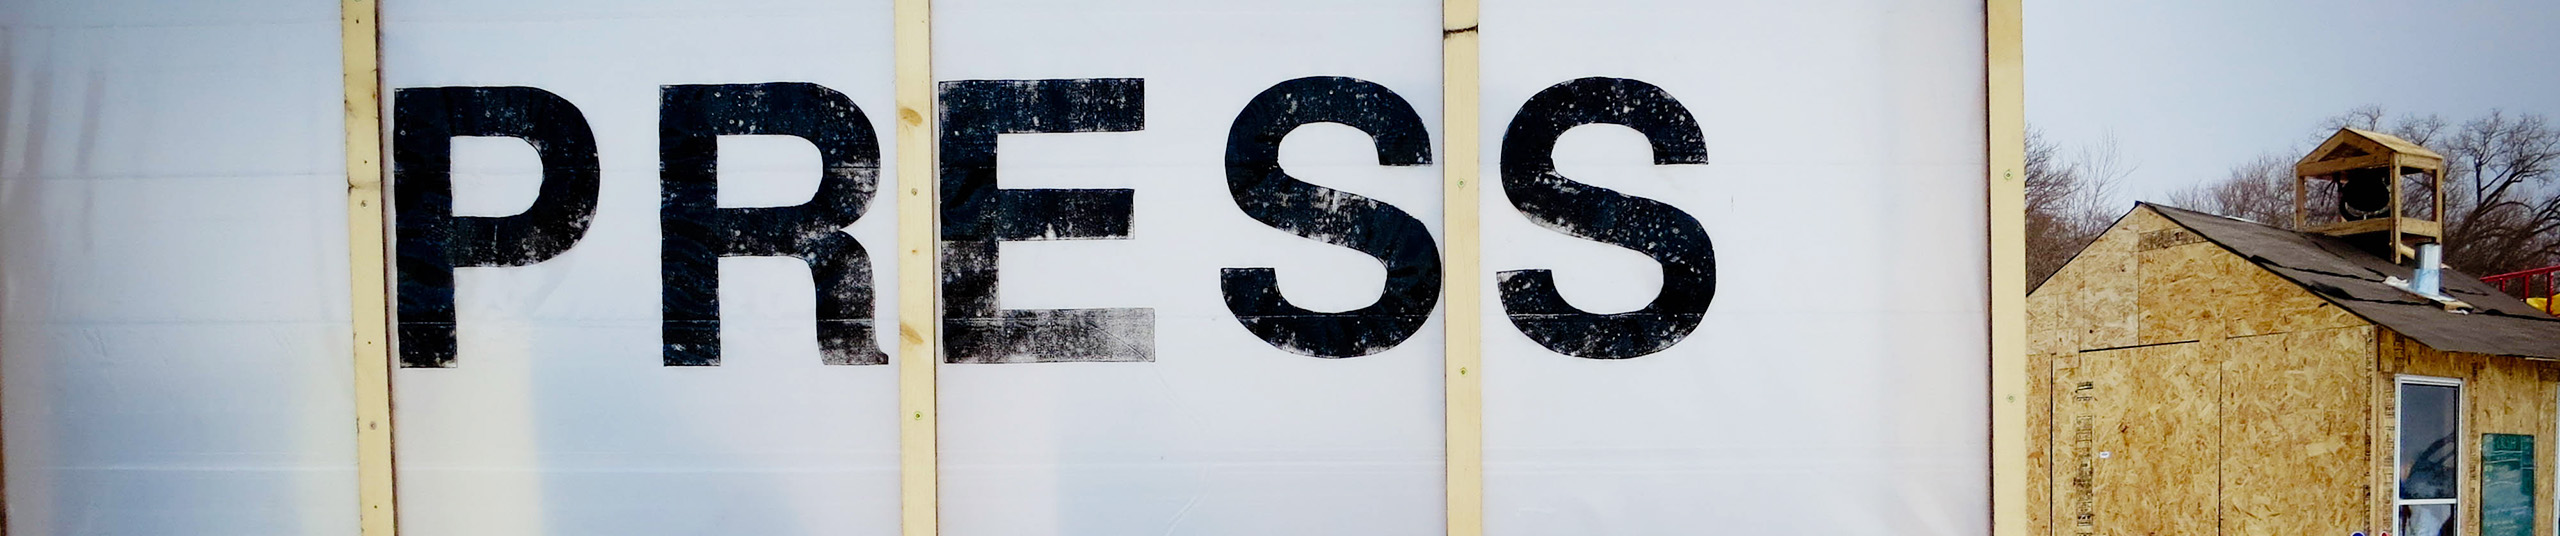 the letters "PRESS" painted in black on plastic wall, with a plywood shanty in the distance